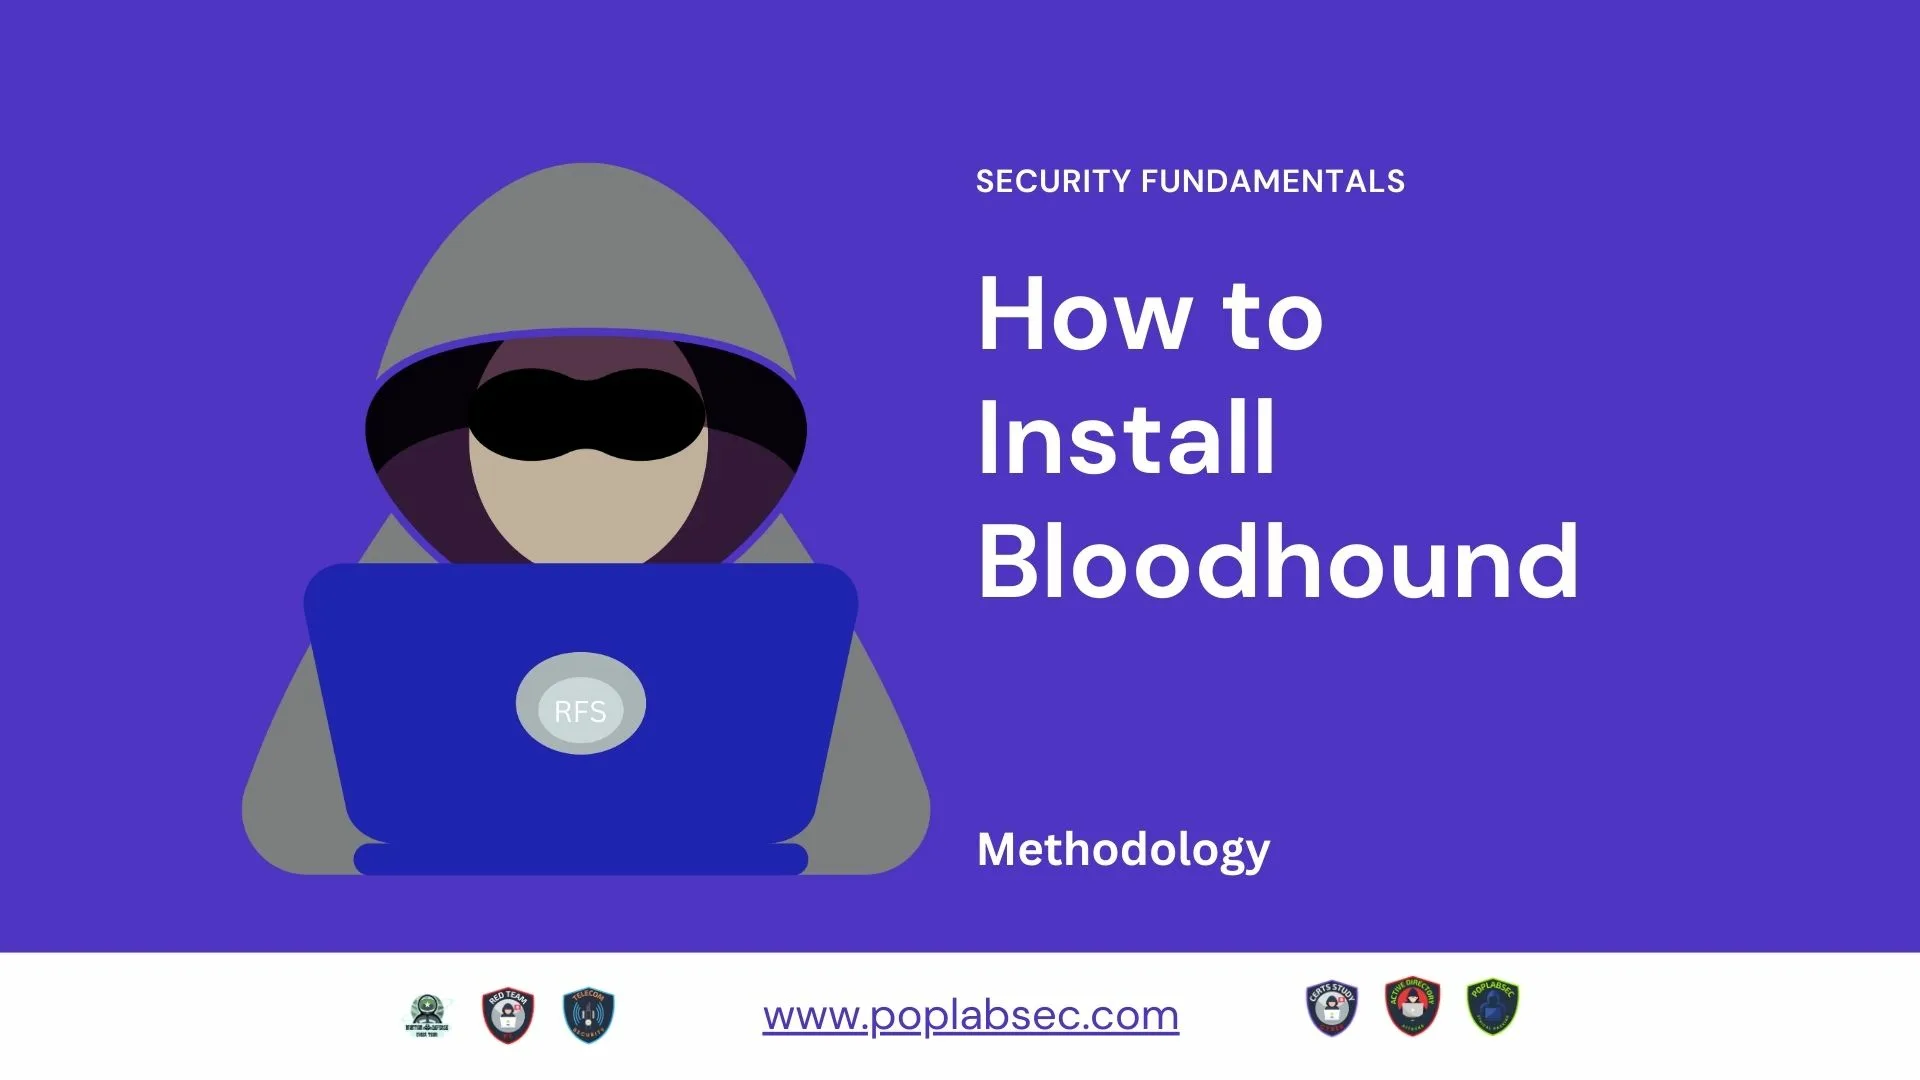 How to Install Bloodhound